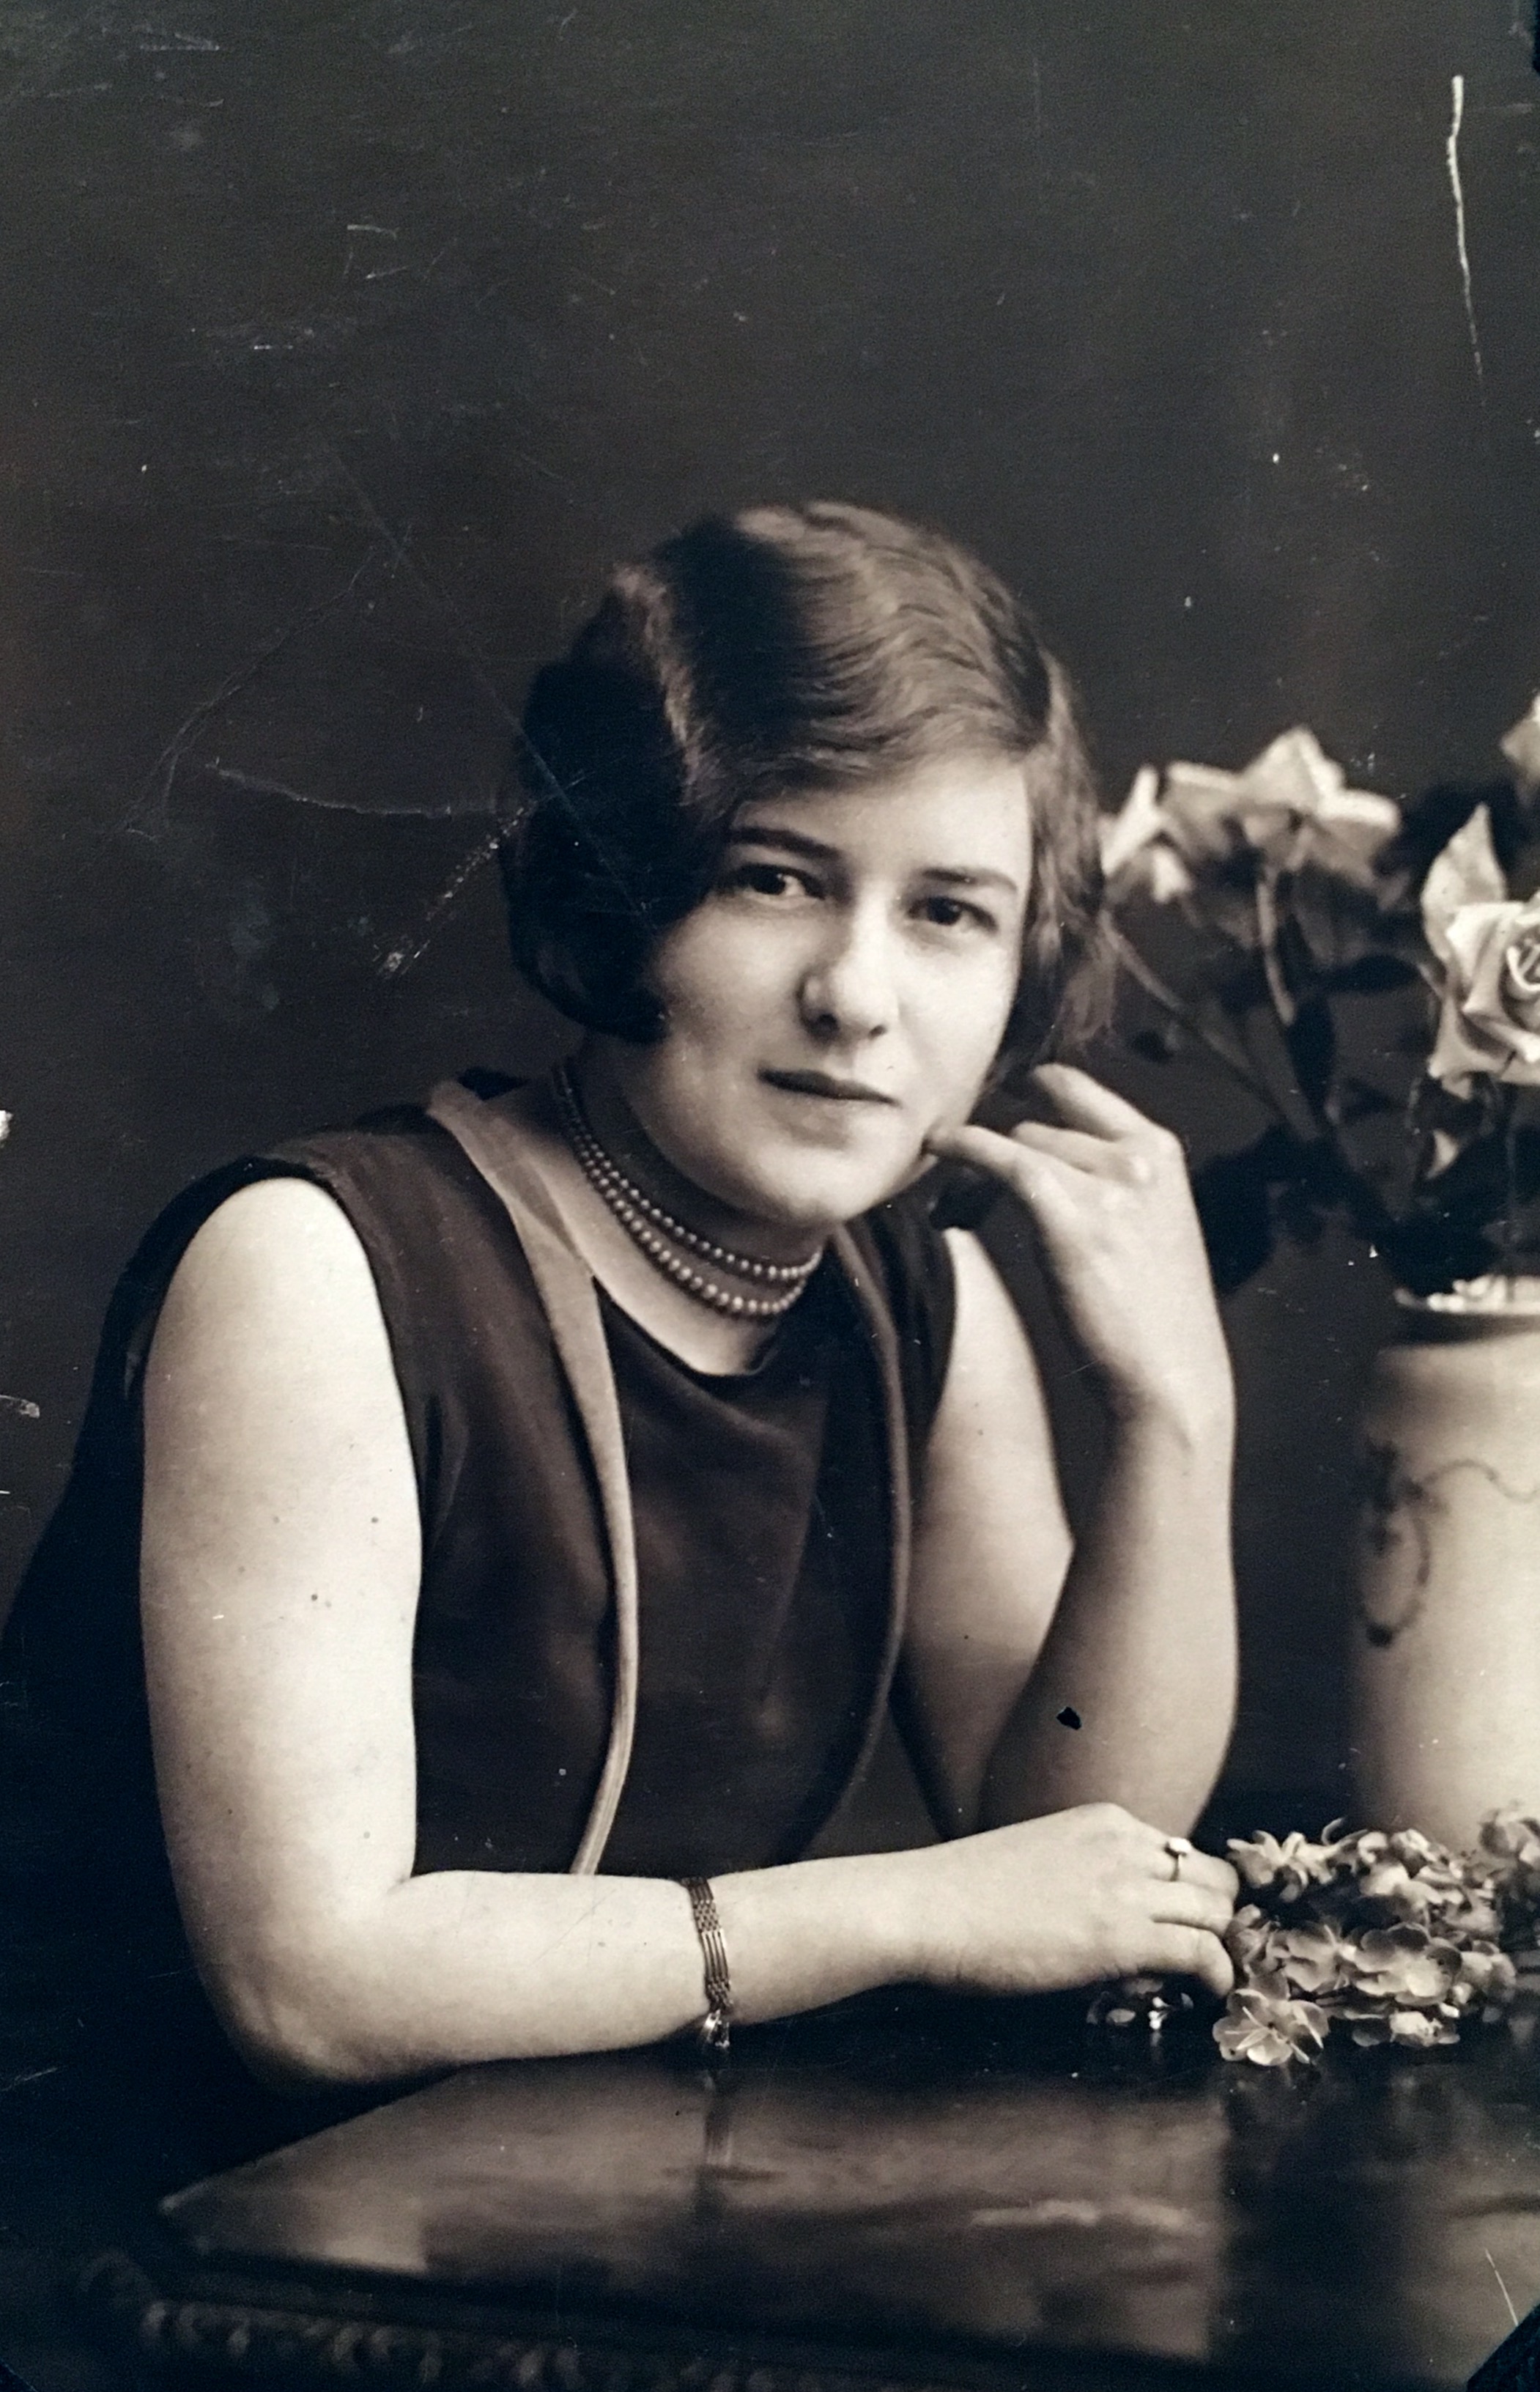 My Great Grandmother in about 1920